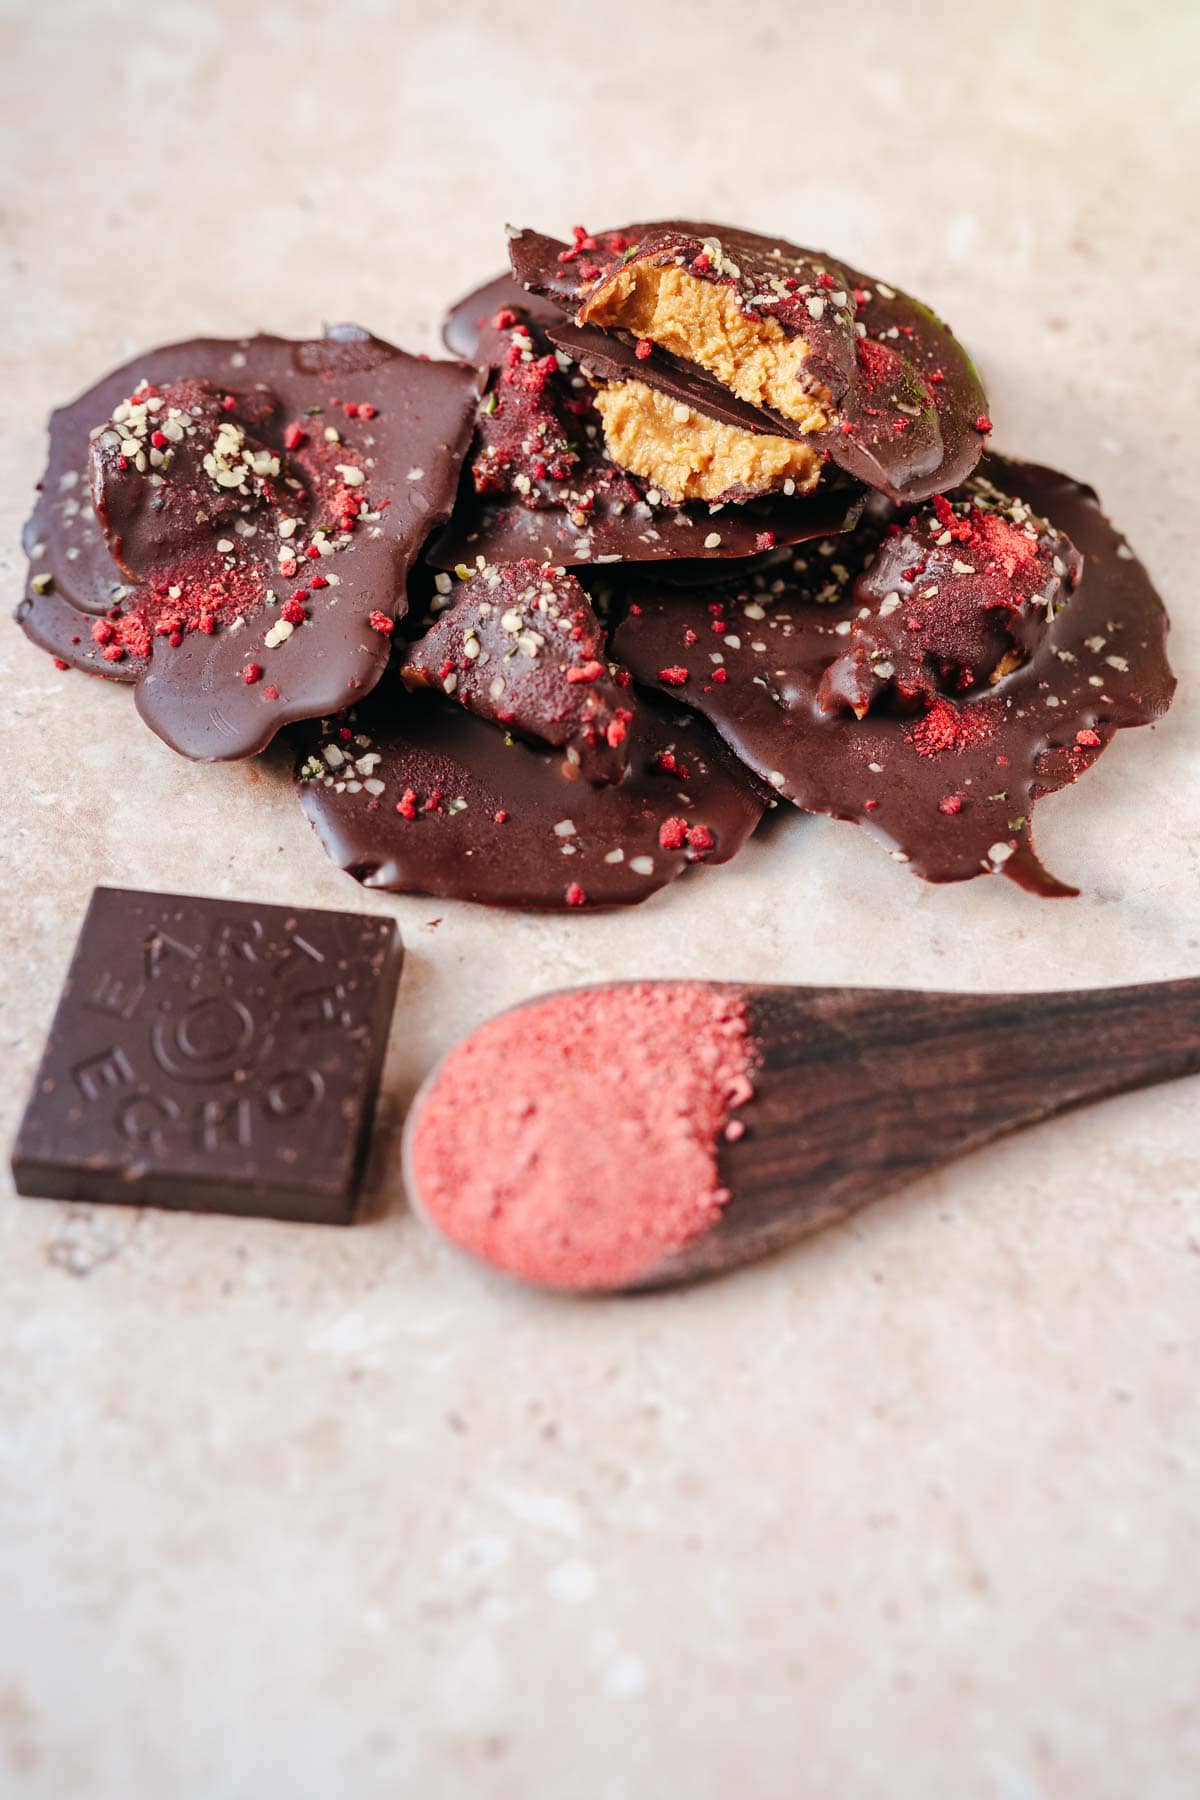 A pile of homemade chocolate puddles dusted with pink powder and small seeds.